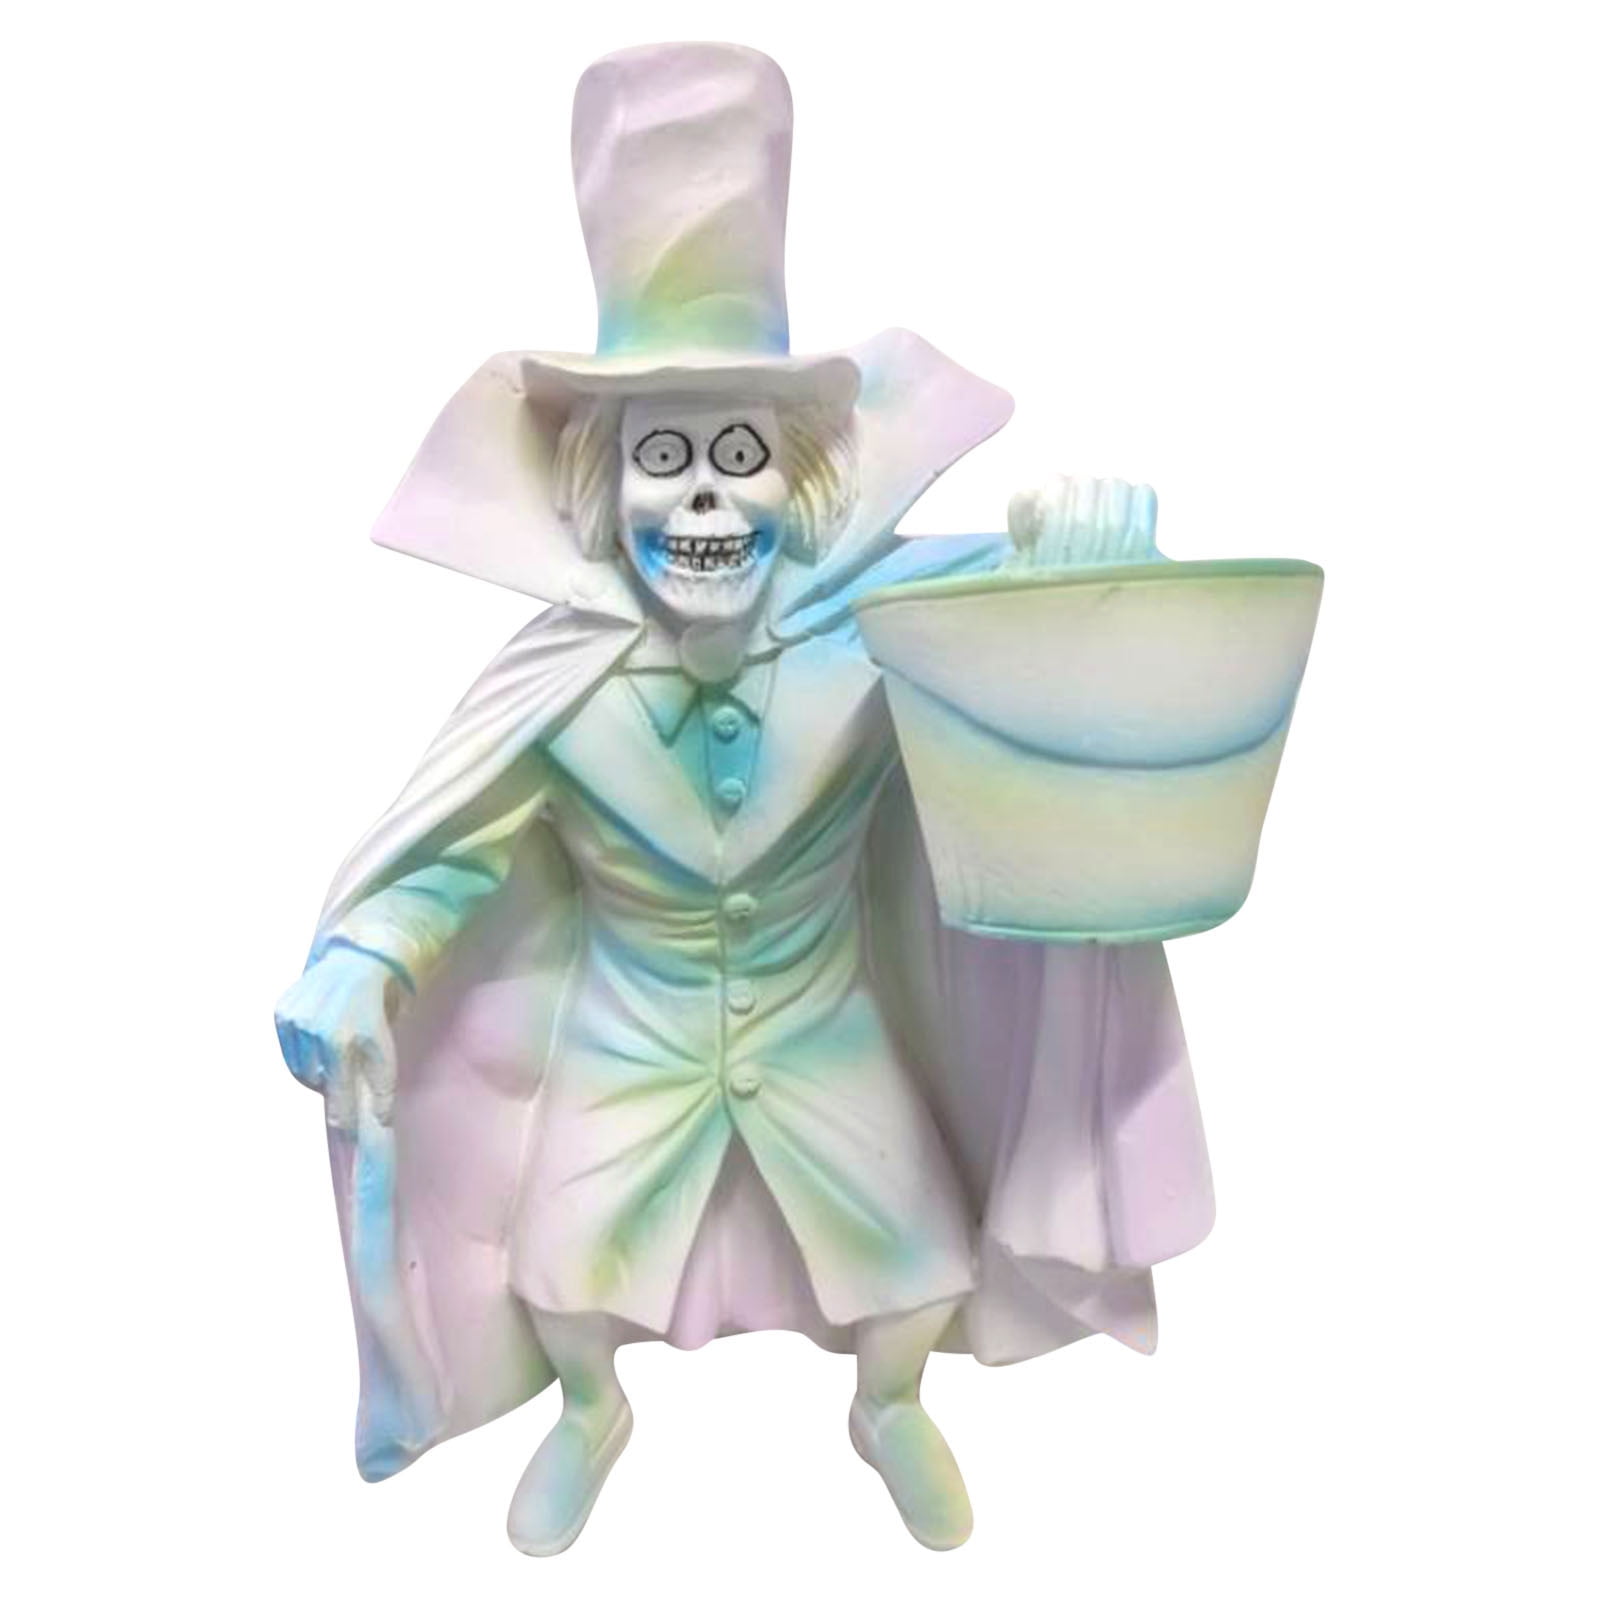 My hatbox ghost costume from the haunted mansion 50th anniversary